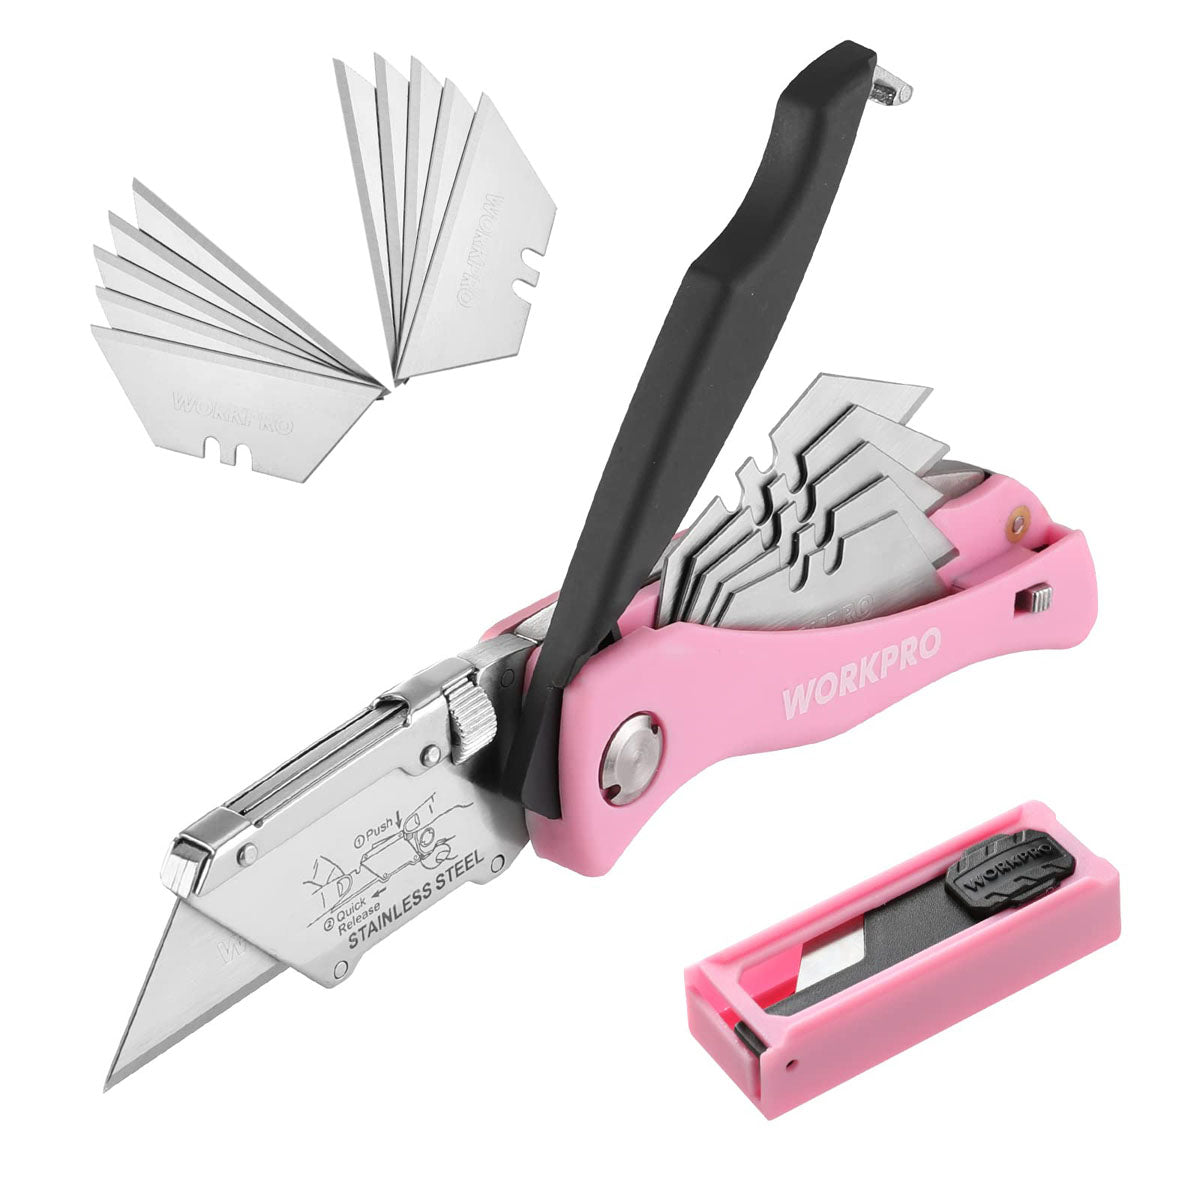 Ladies Utility Knife Box Cutter Retractable Razor Changing Blades Heavy Duty pk, Pink